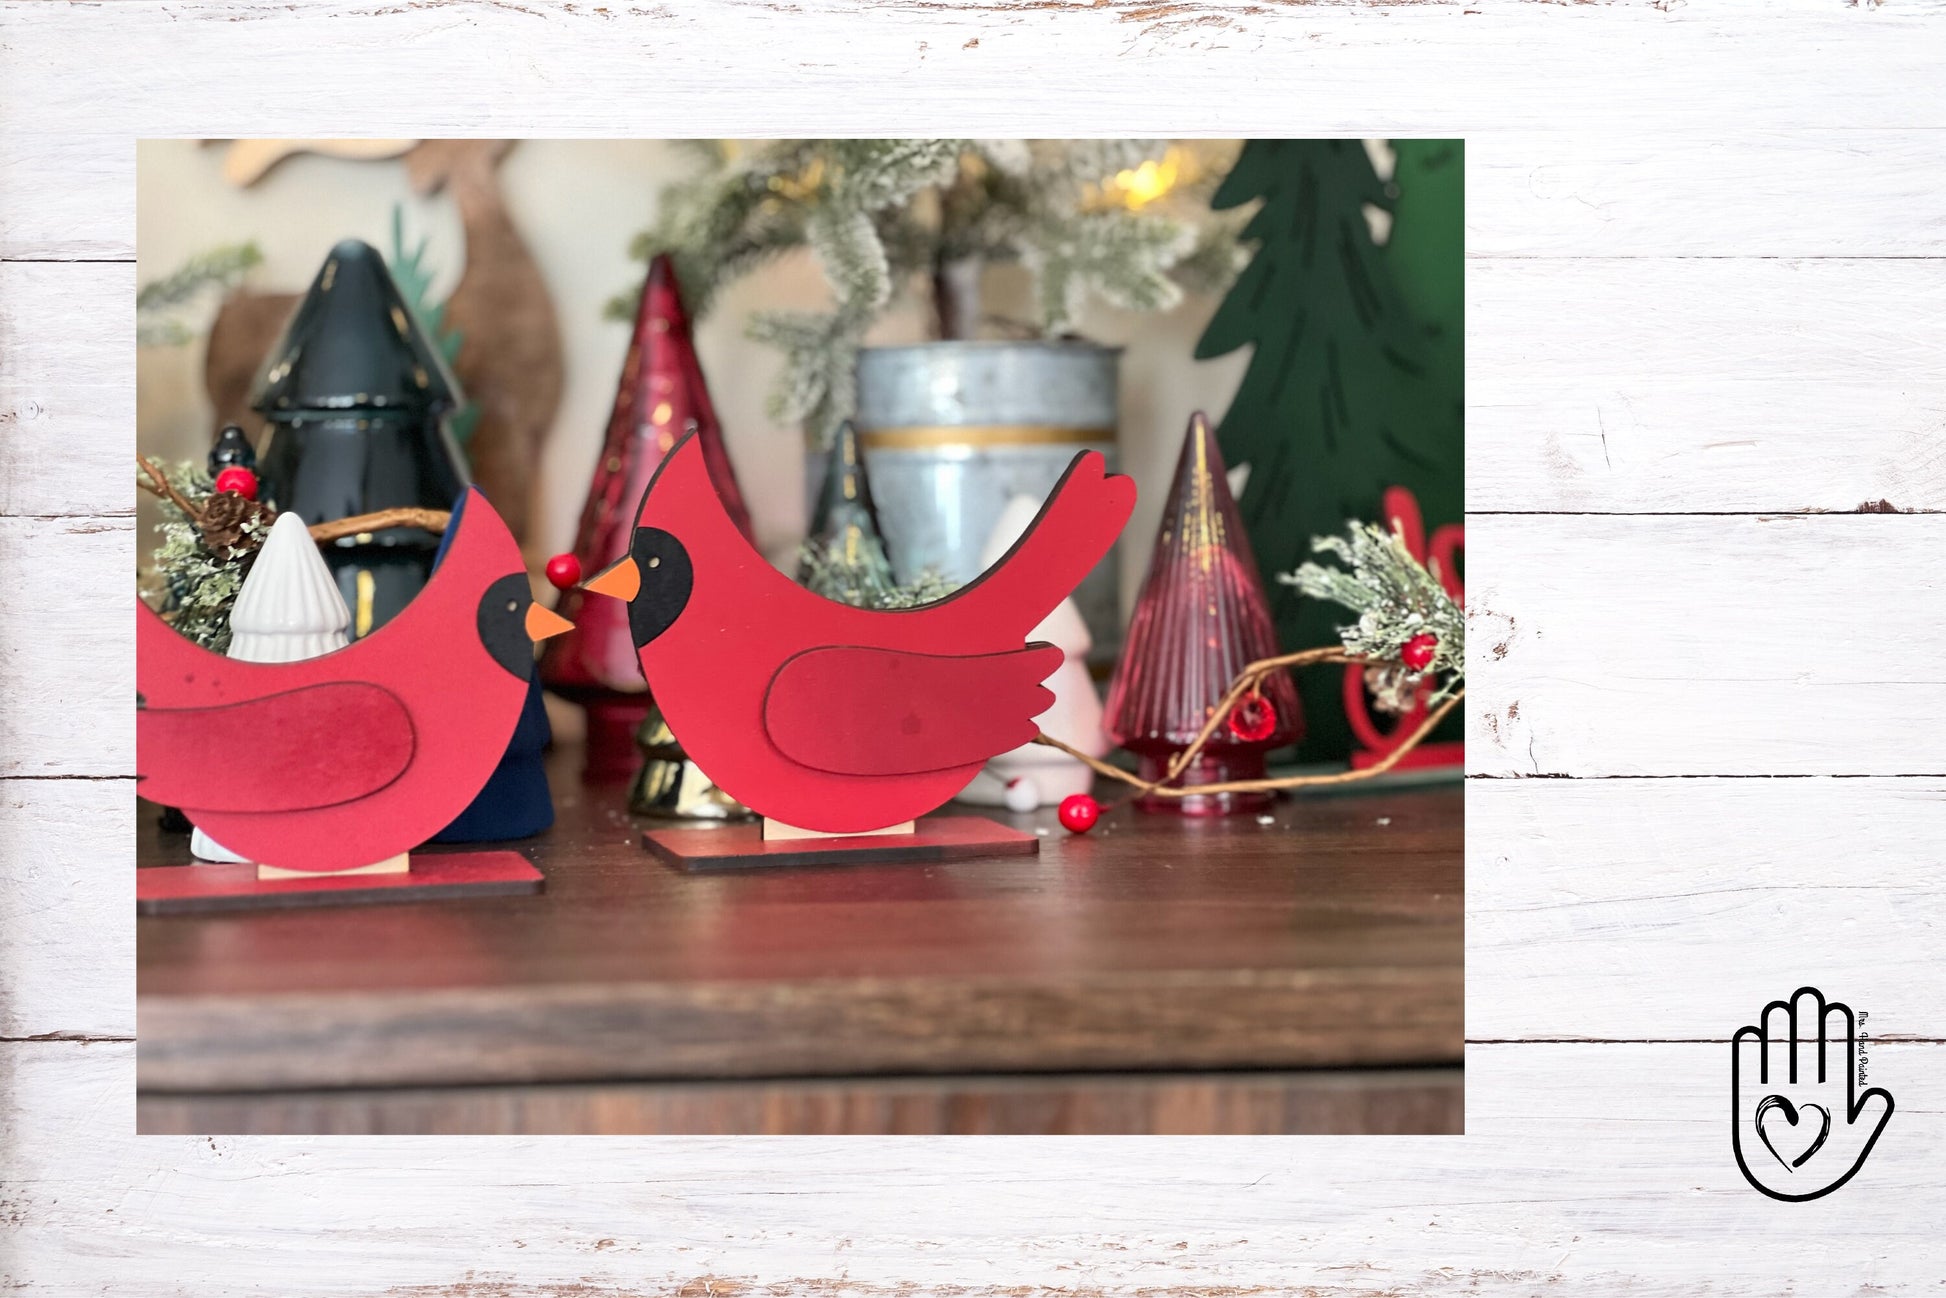 Digital Cut File - Laser Cut Standup Cardinals with Slotted Bases - .svg, .ai laser cut files